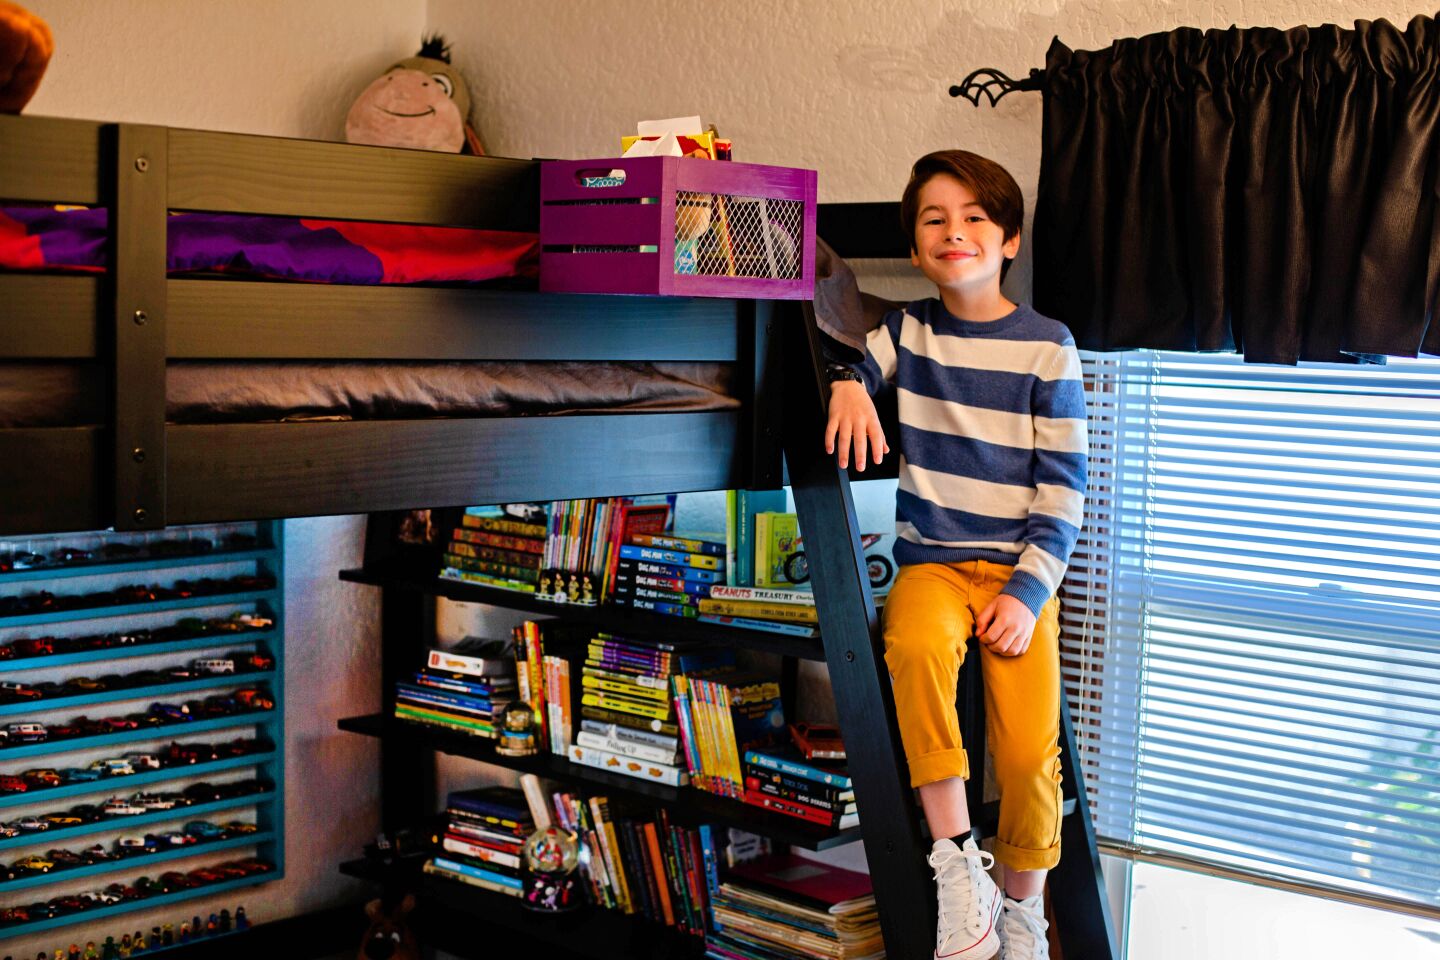 Actor Paxton Booth plays Ollie Wrather on the Disney Channel series "Coop & Cami Ask the World." Paxton’s bedroom in his parents' Ventura home houses all the things he loves.